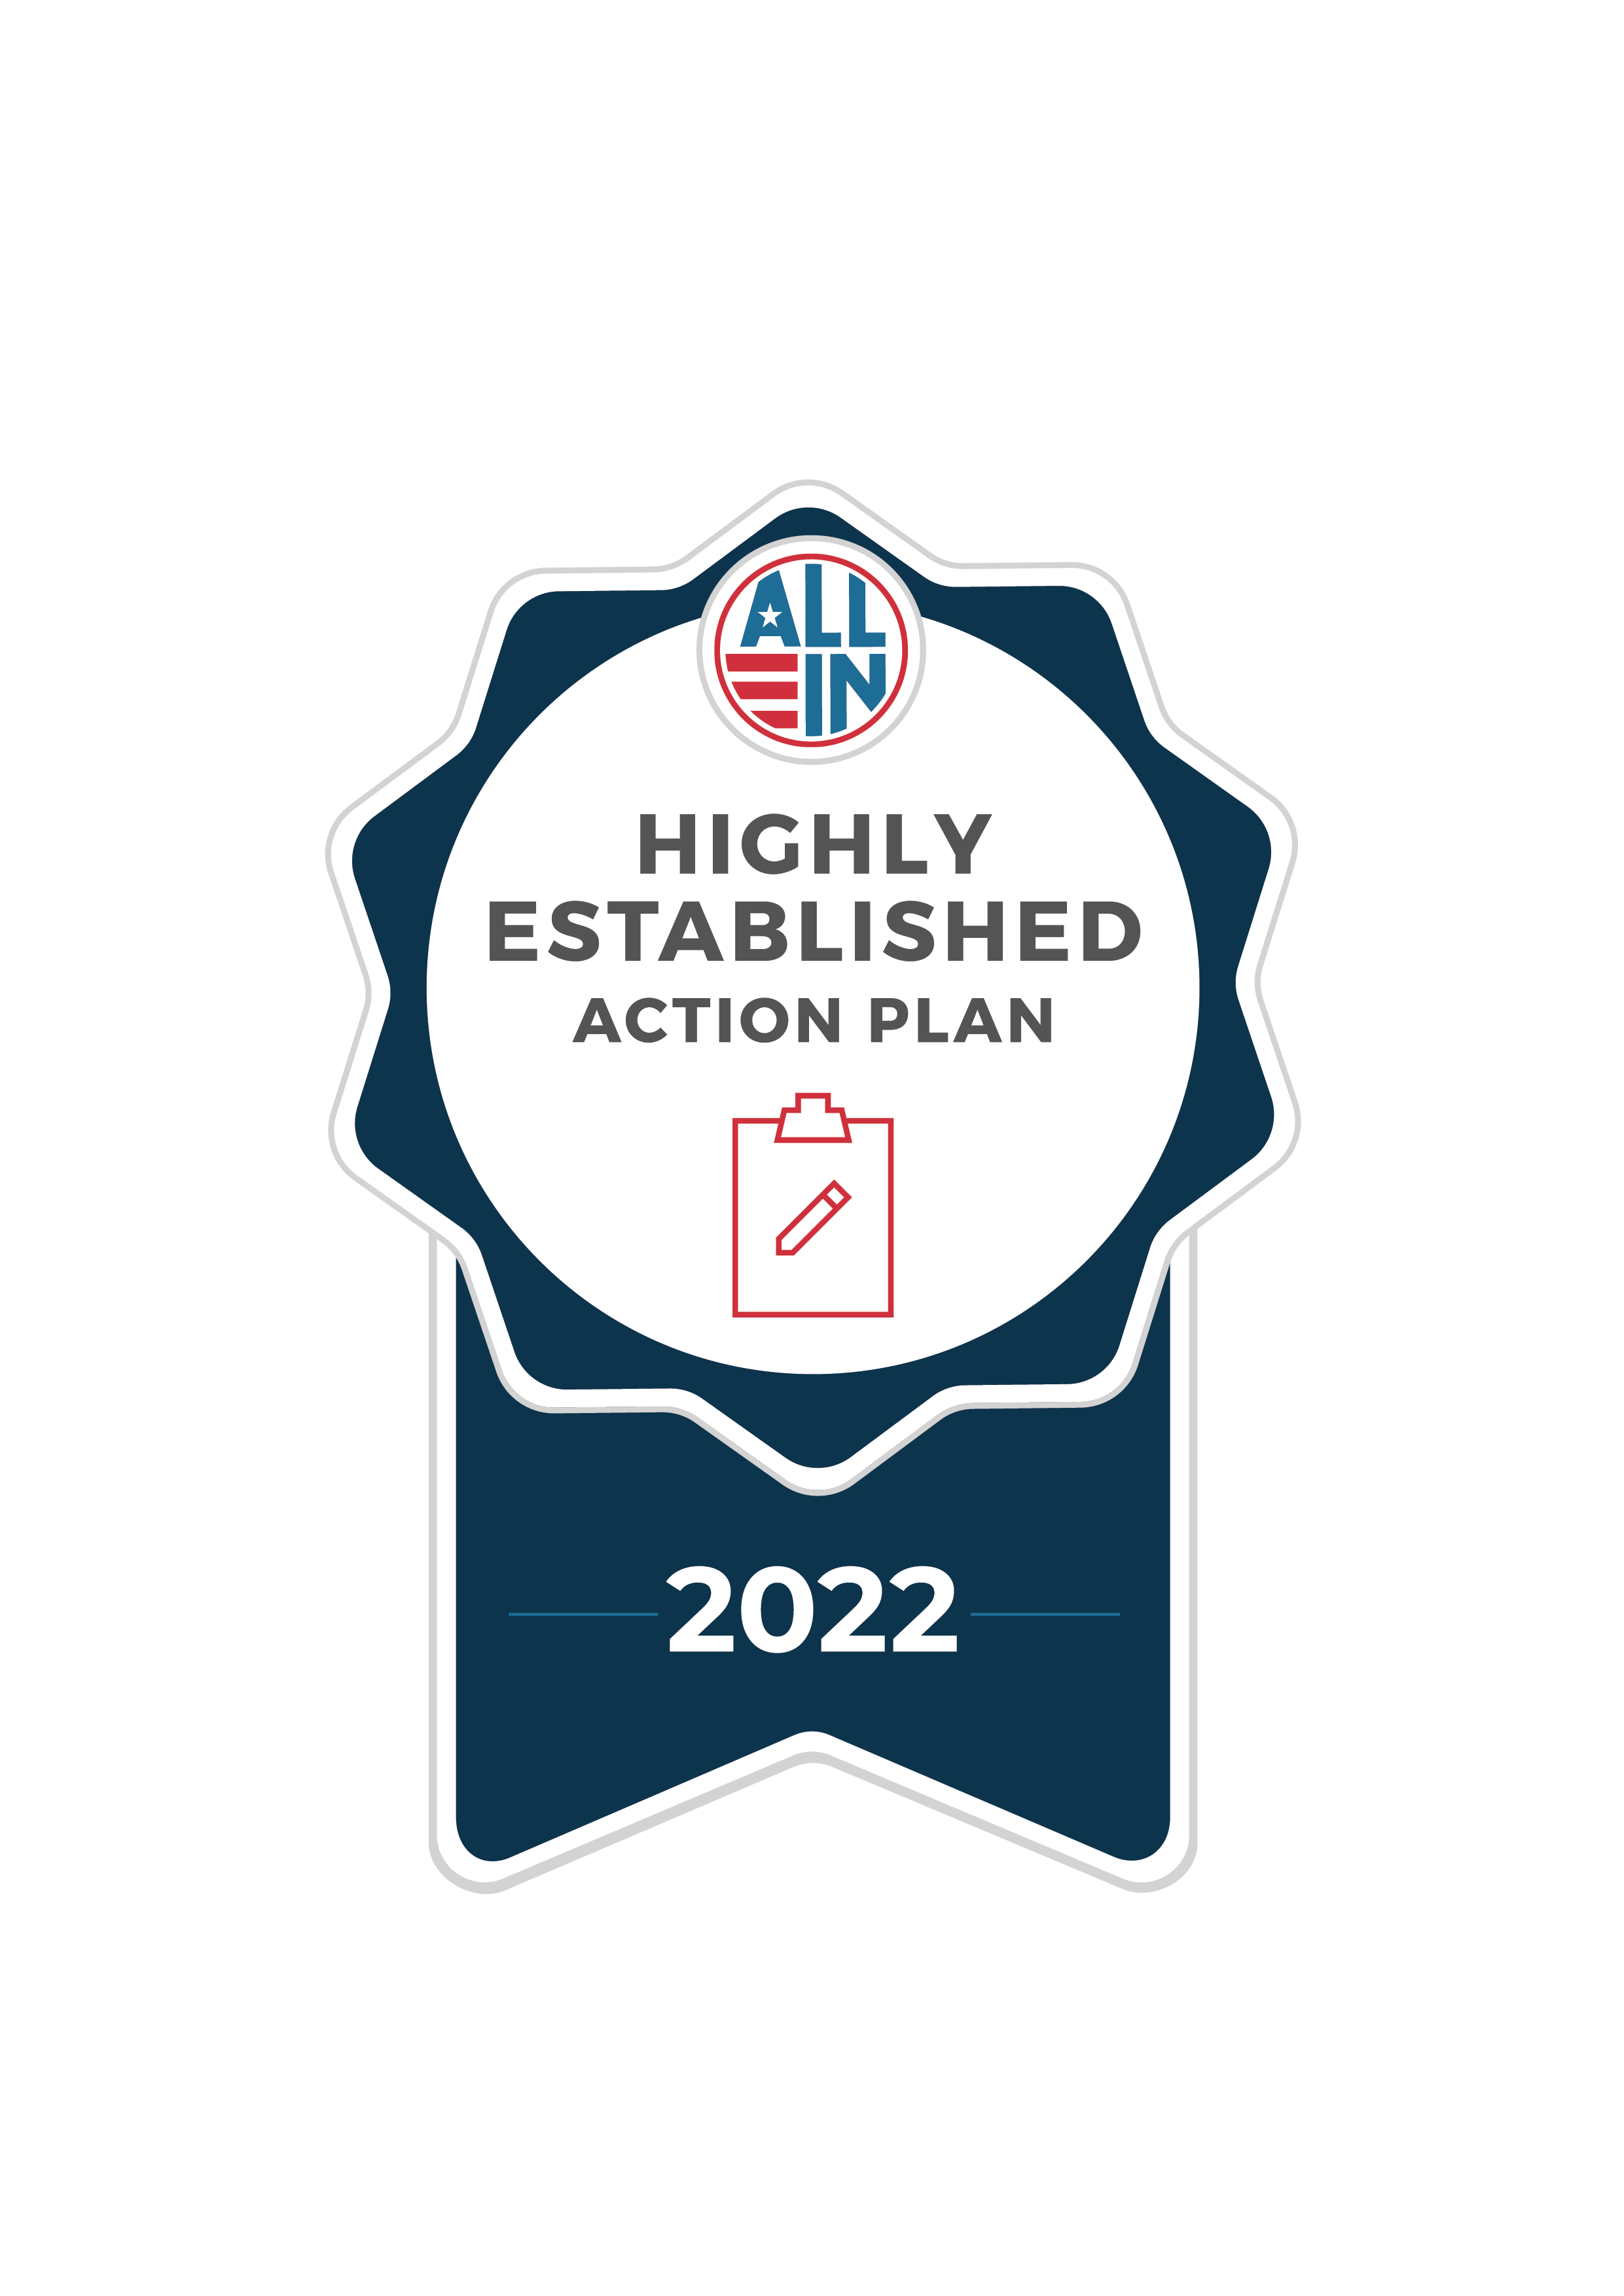 ALL IN Highly Established Action Plan Seal